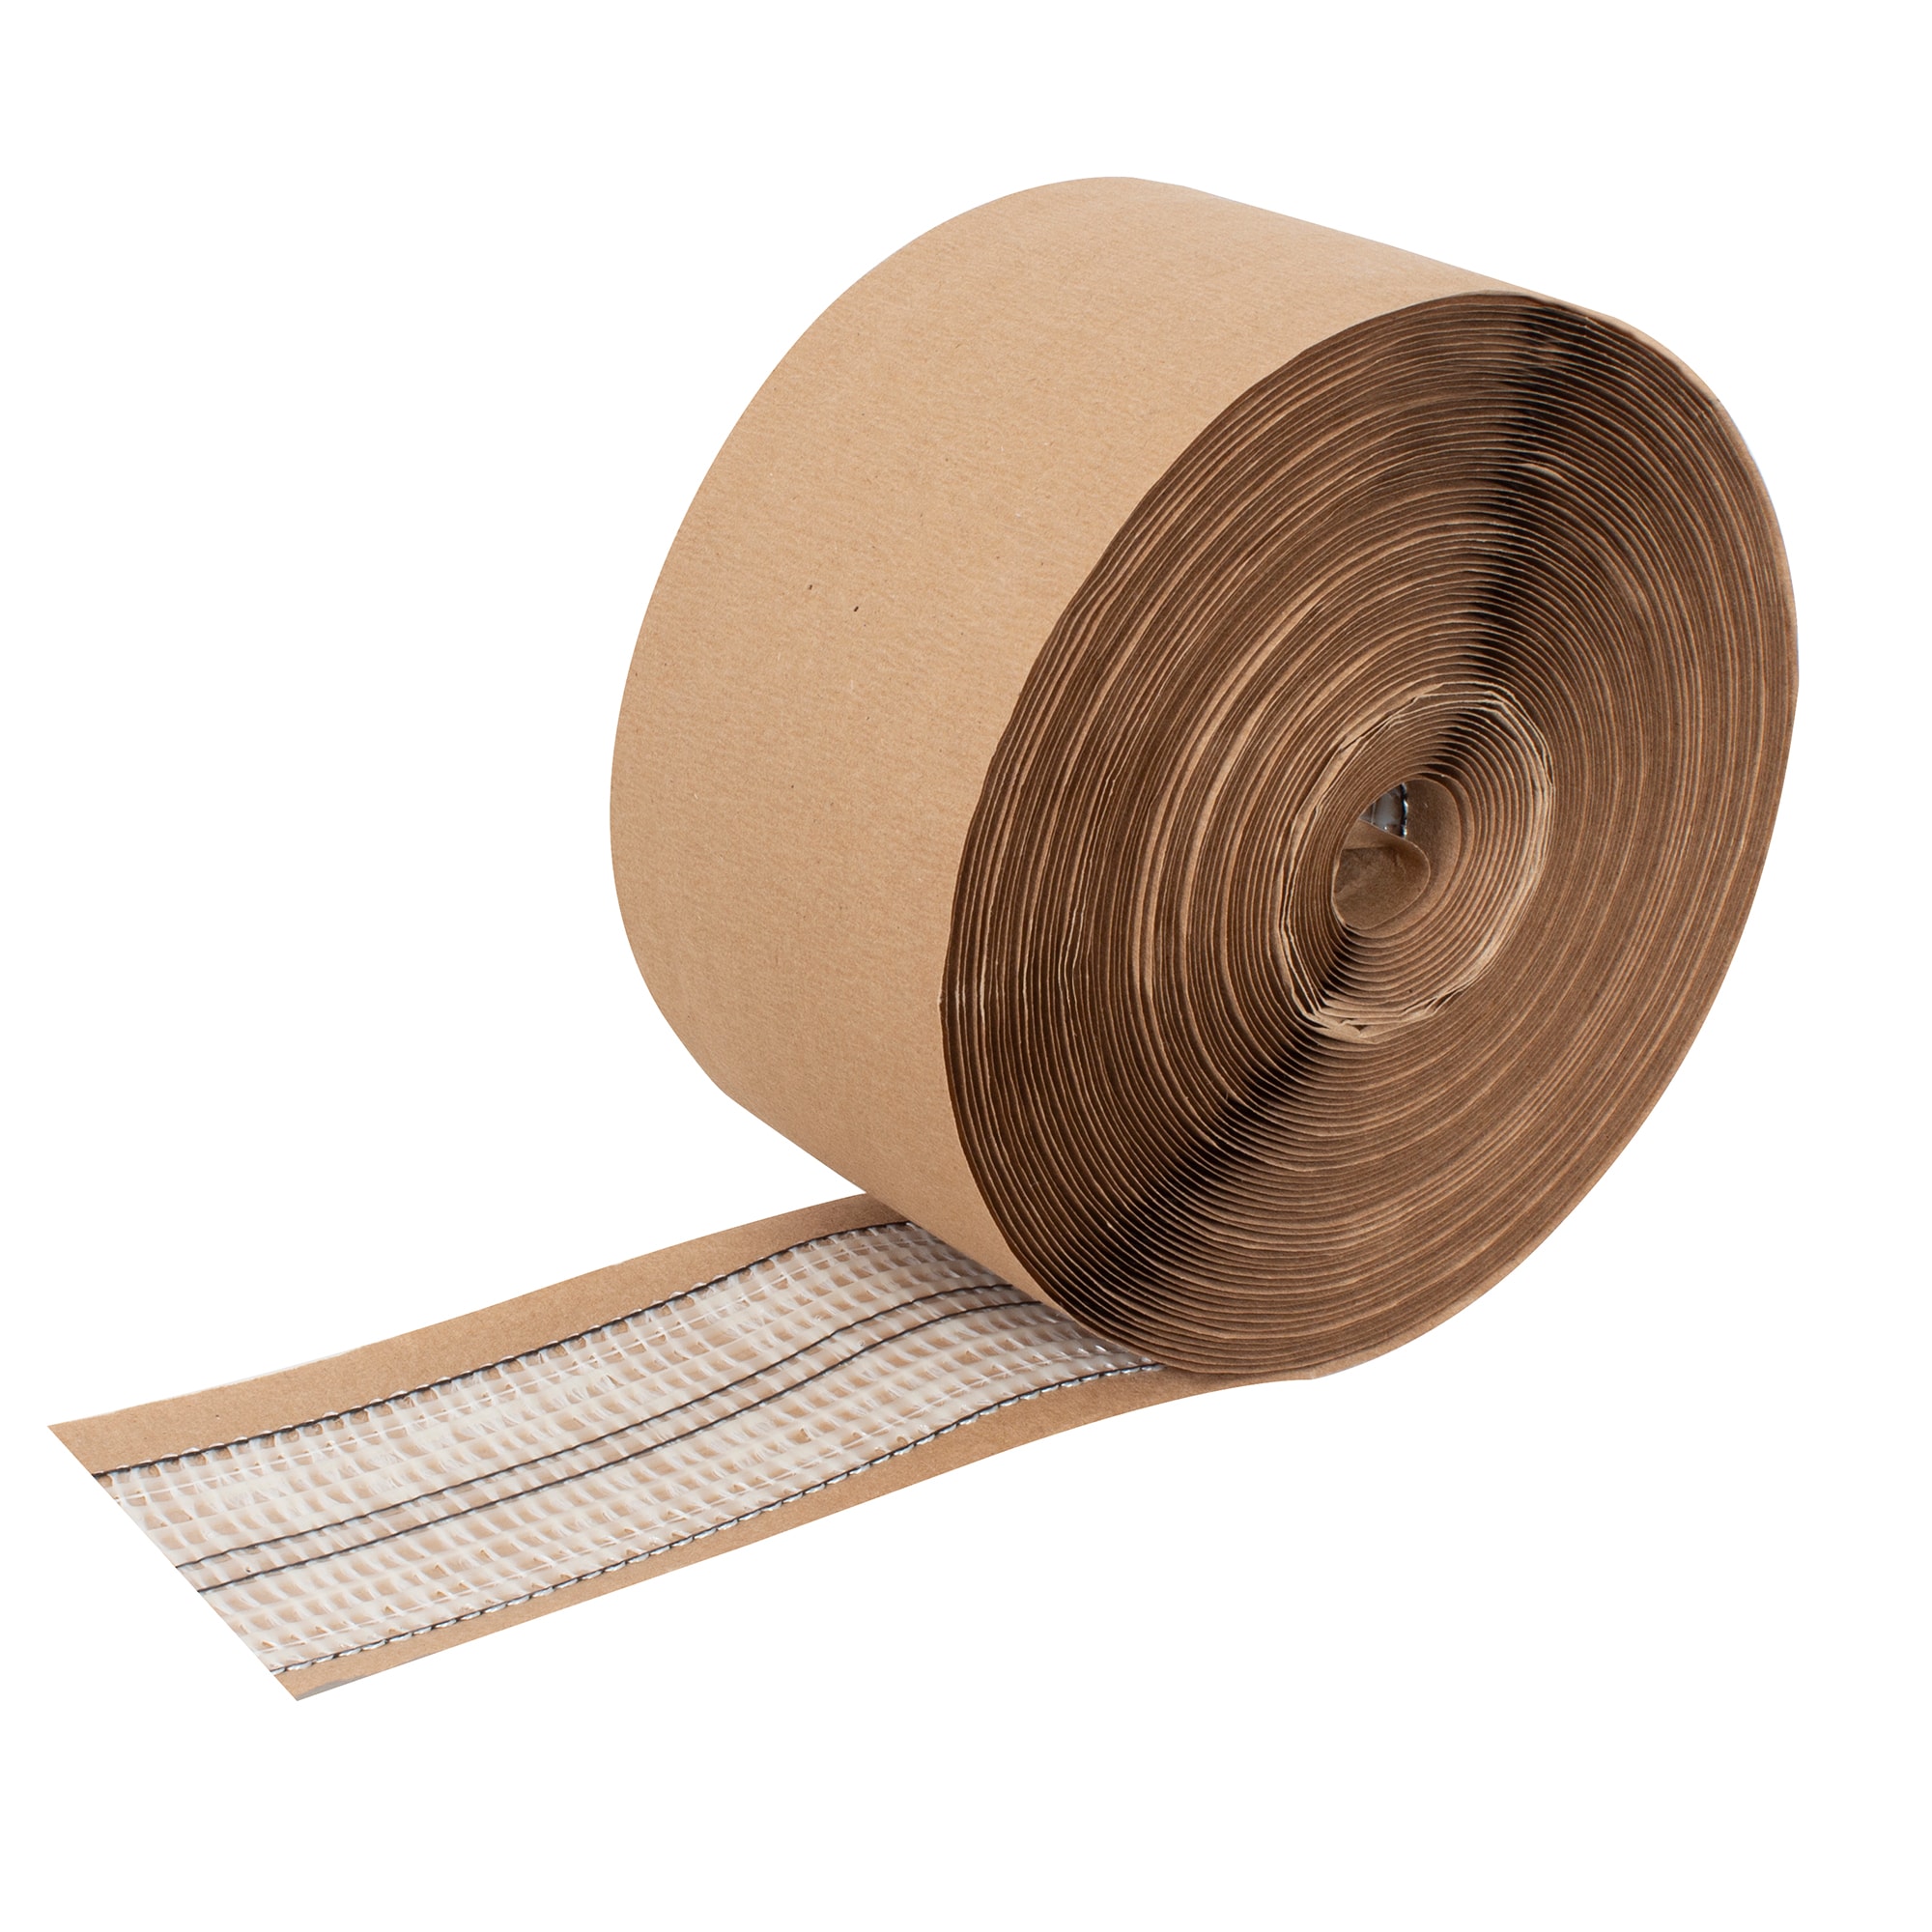 canopus double sided carpet tape for area rugs: non slip rug tape for  hardwood floors, stair treads, tile, laminate floors, 2-inch x 30 yards 